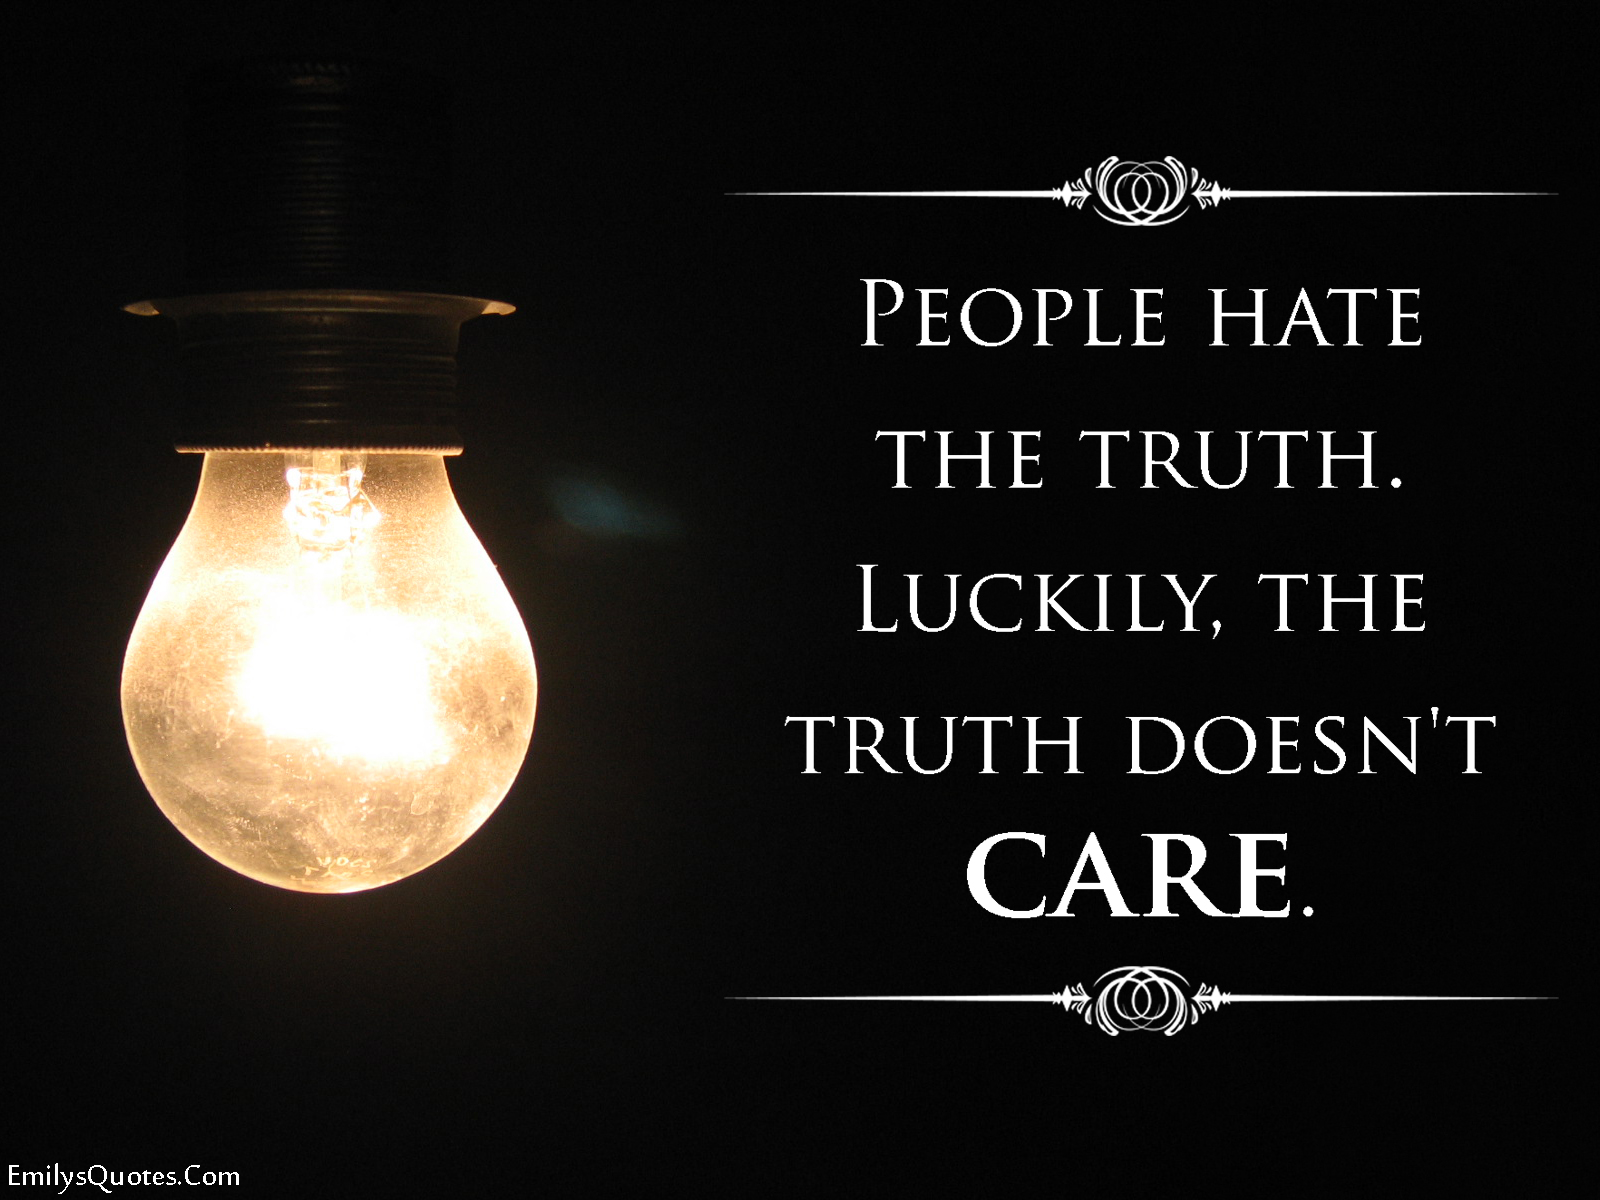 People hate the truth. Luckily, the truth doesn’t care